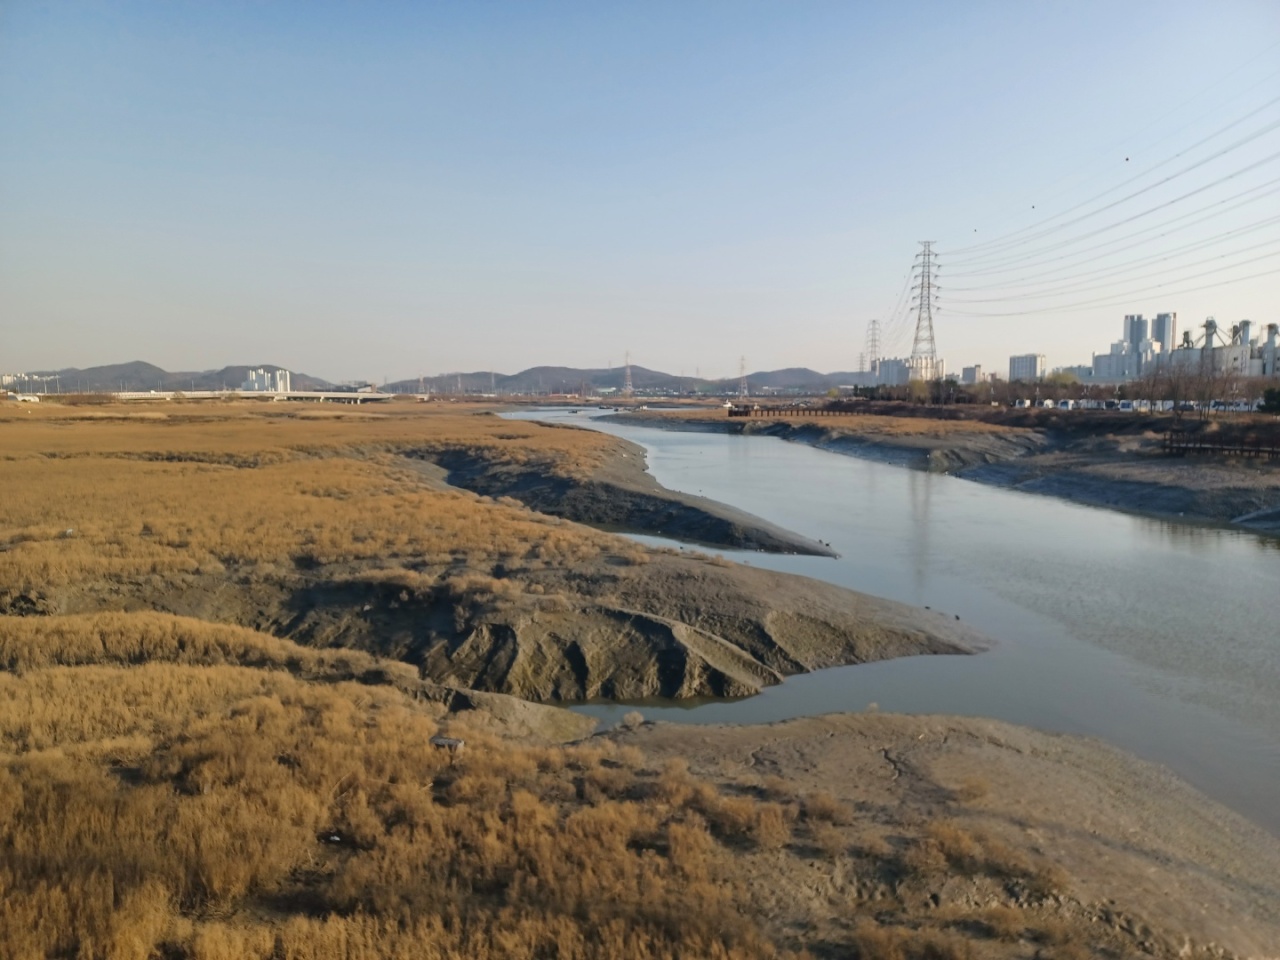 Tidal flat areas are visible after crossing Soyeom Bridge near the entrance of the park. (Lee Si-jin/The Korea Herald)